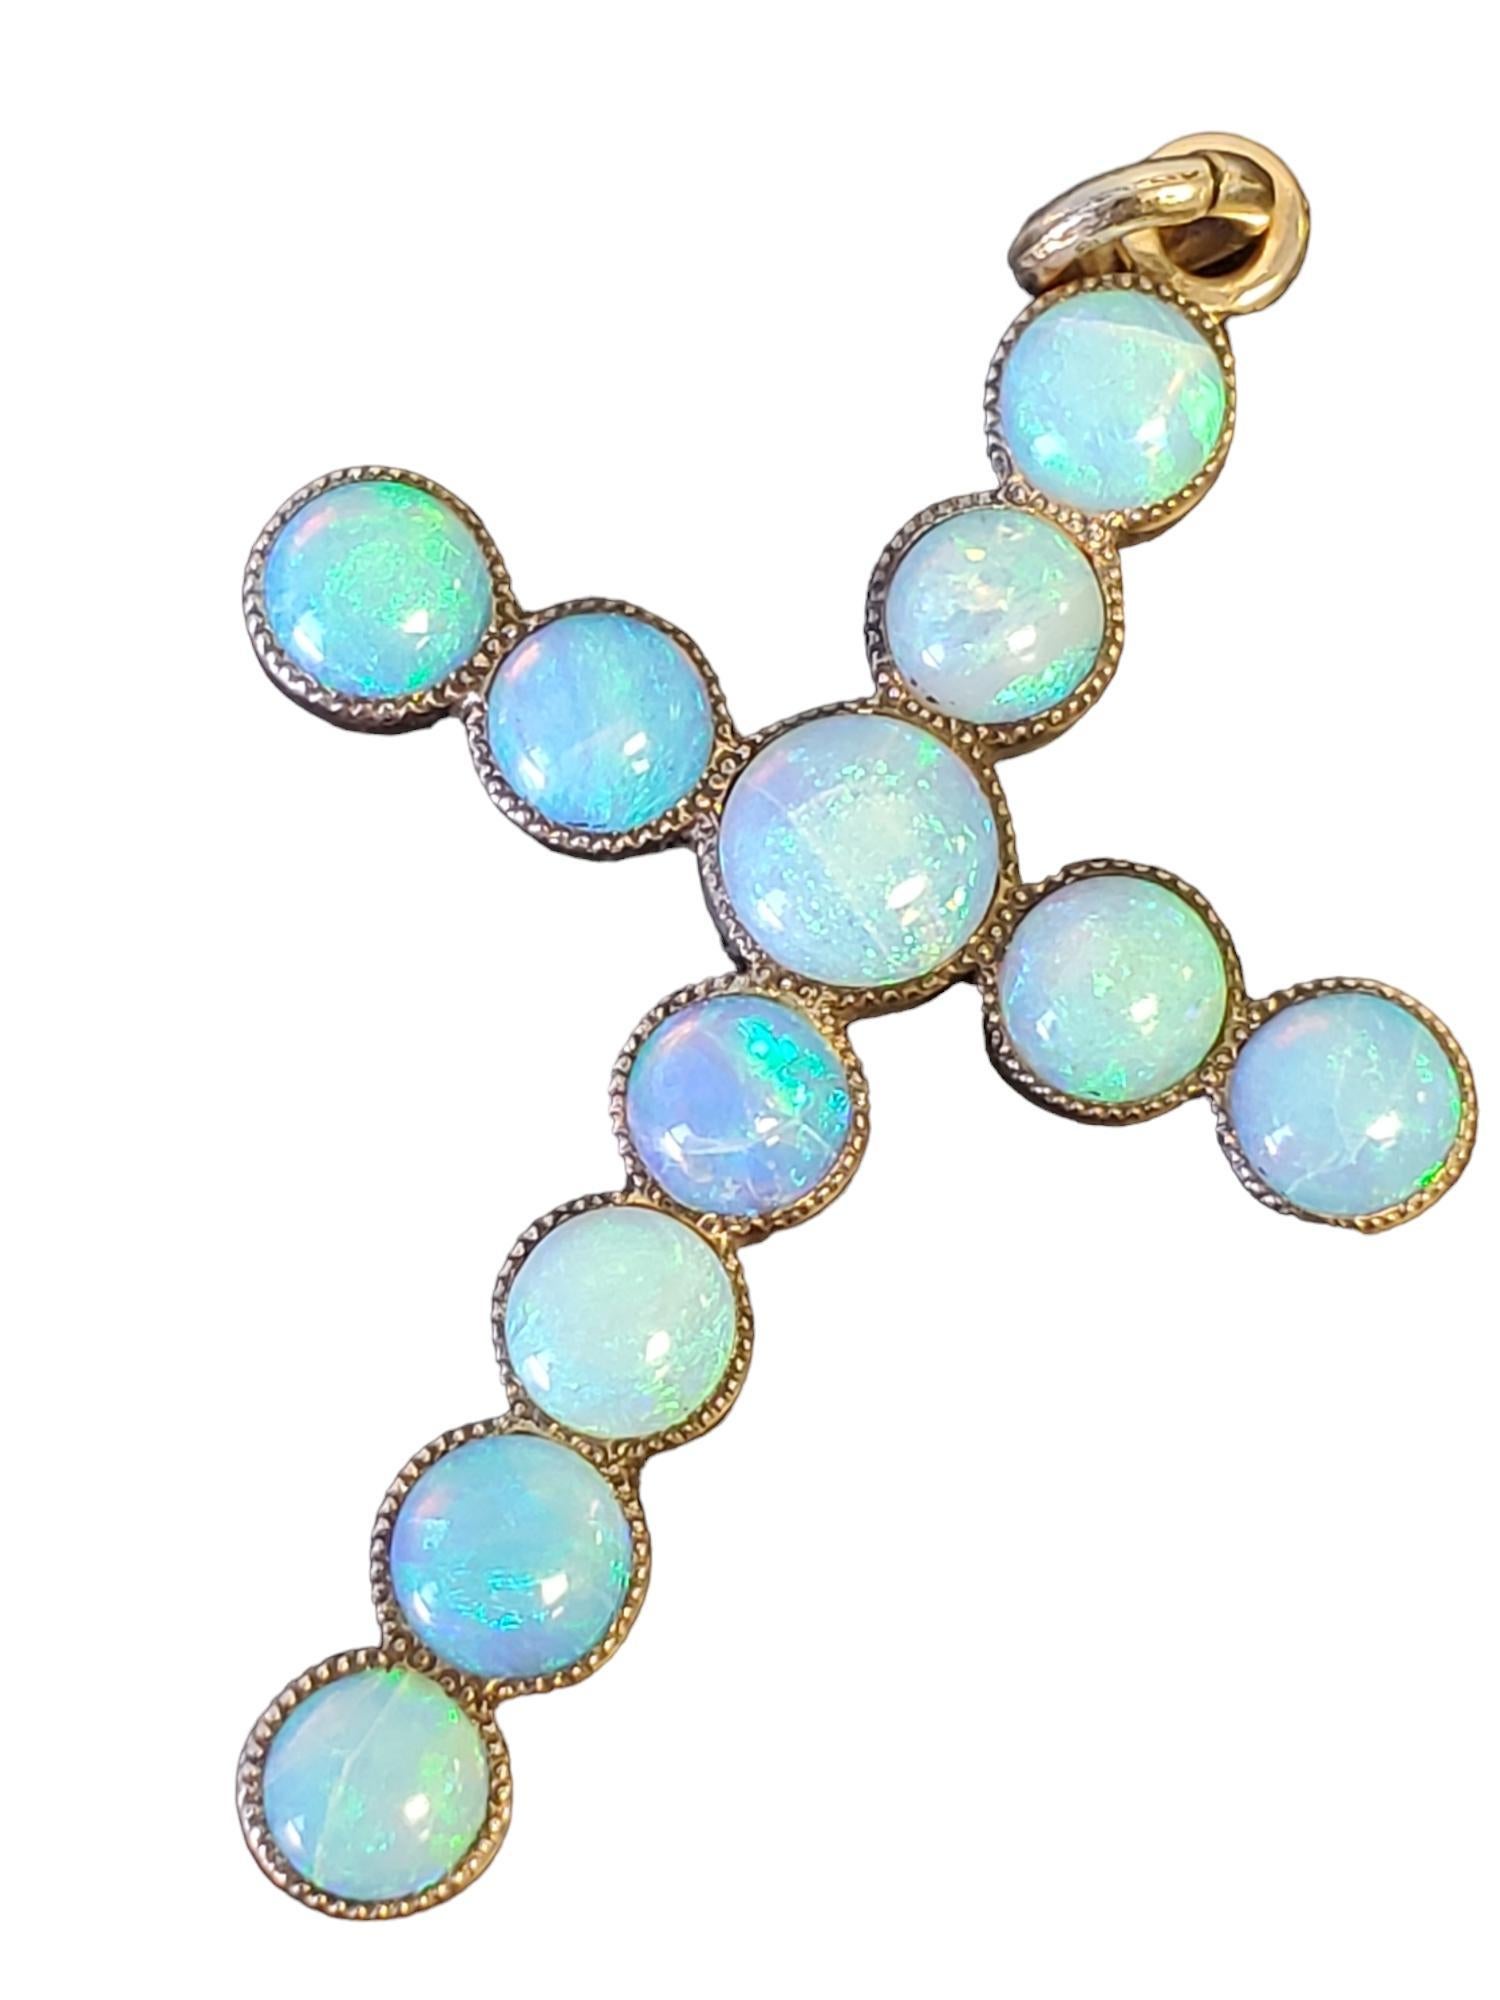 Listed is a vintage 10k gold opal cross pendant. It is large and the opals are spectacular blue color while being very uniform in the piece, this is a feat for natural opals. The length is 2.25